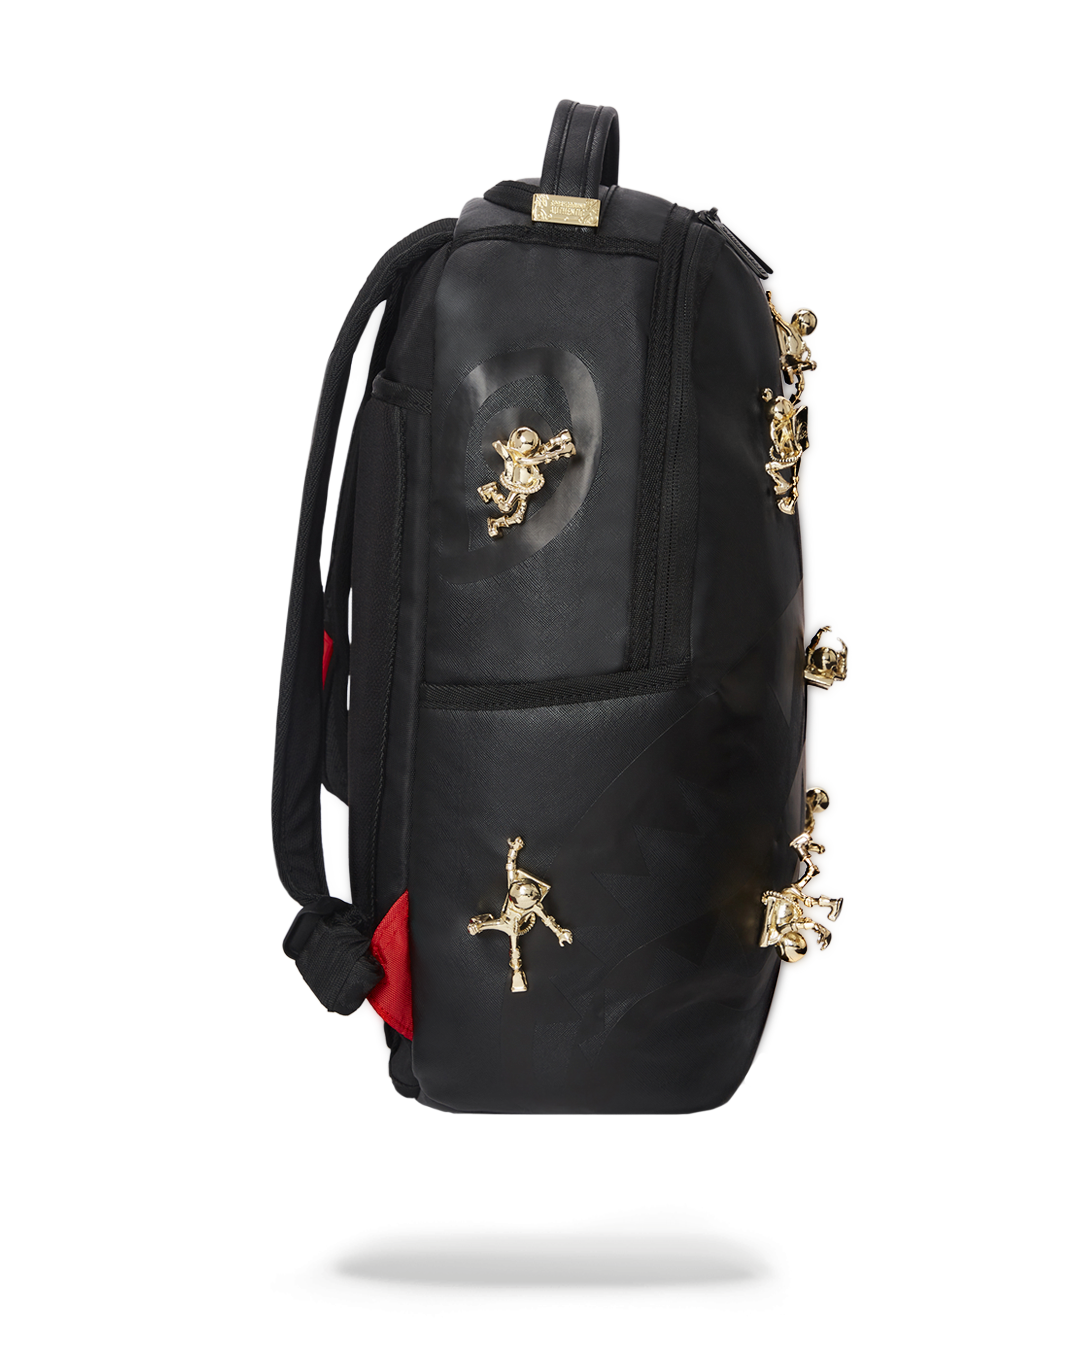 THE LOST IN SPACE BACKPACK (10 3D GOLD METAL ASTRONAUTS) – SPRAYGROUND®